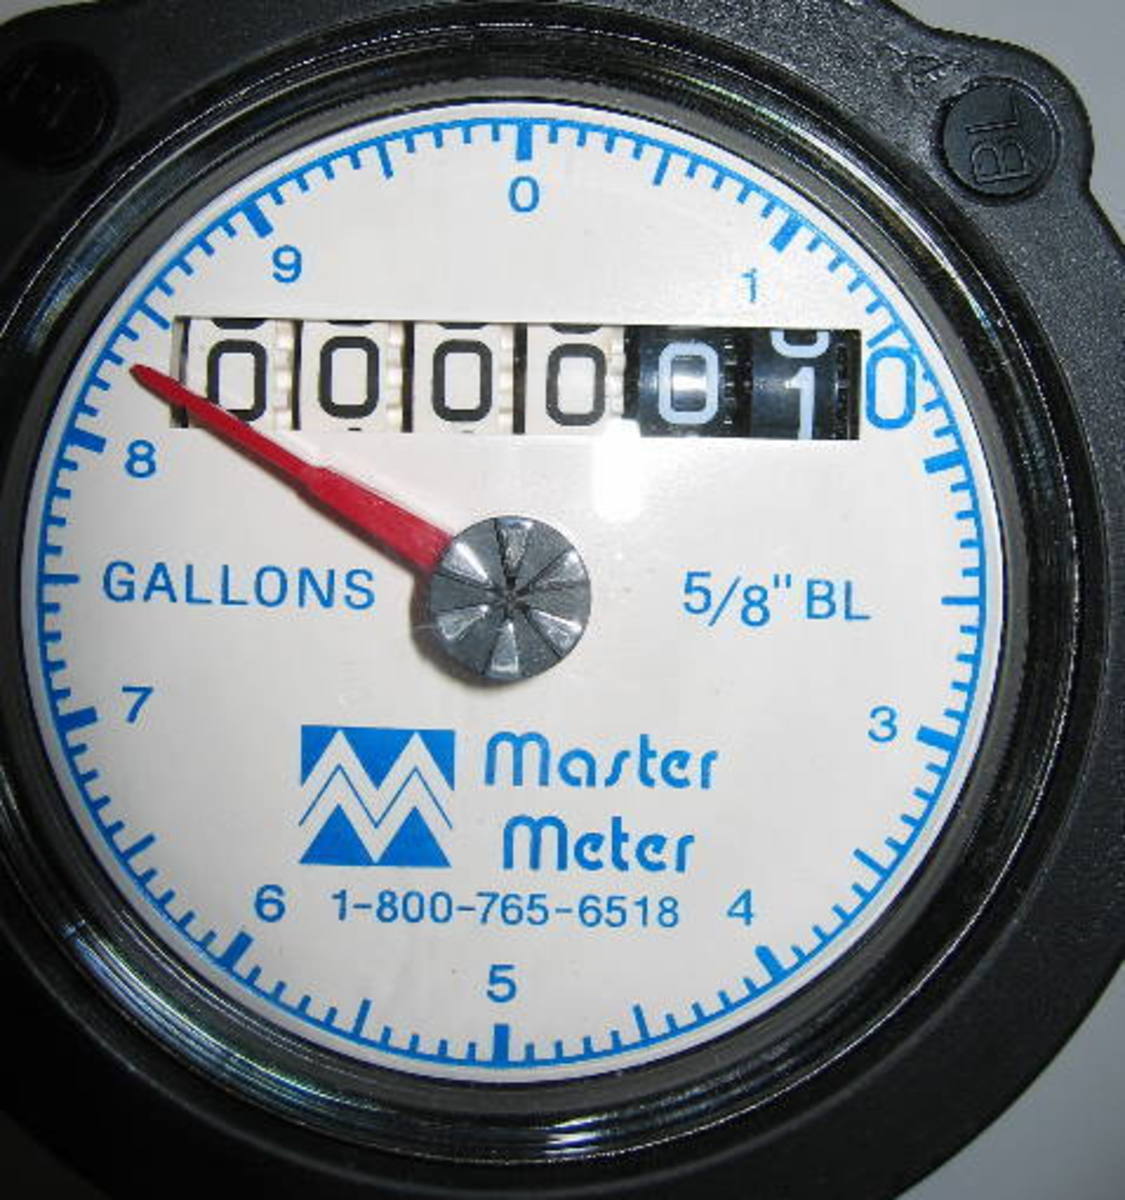 Check your water meter to see if the needle moves when all water is turned off. The meter will be located somewhere between the street and the house, before the plumbing system starts (under a cover in the ground or somewhere next to the house).